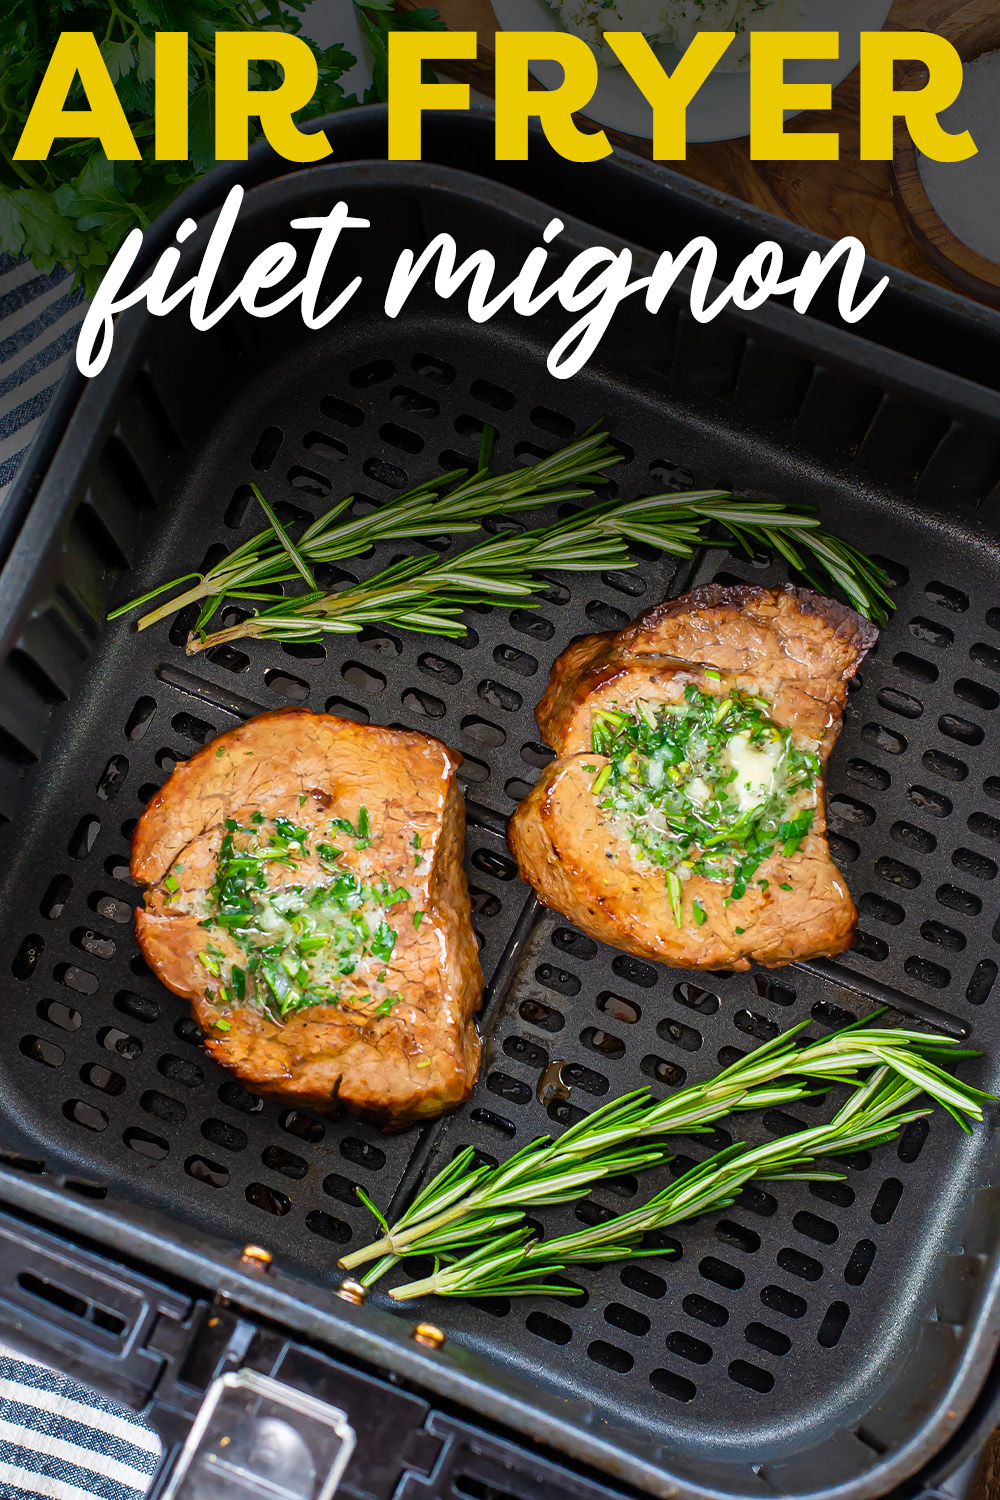 Learn how to cook perfectly tender Air Fryer Filet Mignon every time! This recipe is foolproof and our garlic herb butter is the perfect way to finish off this beautiful cut of meat.